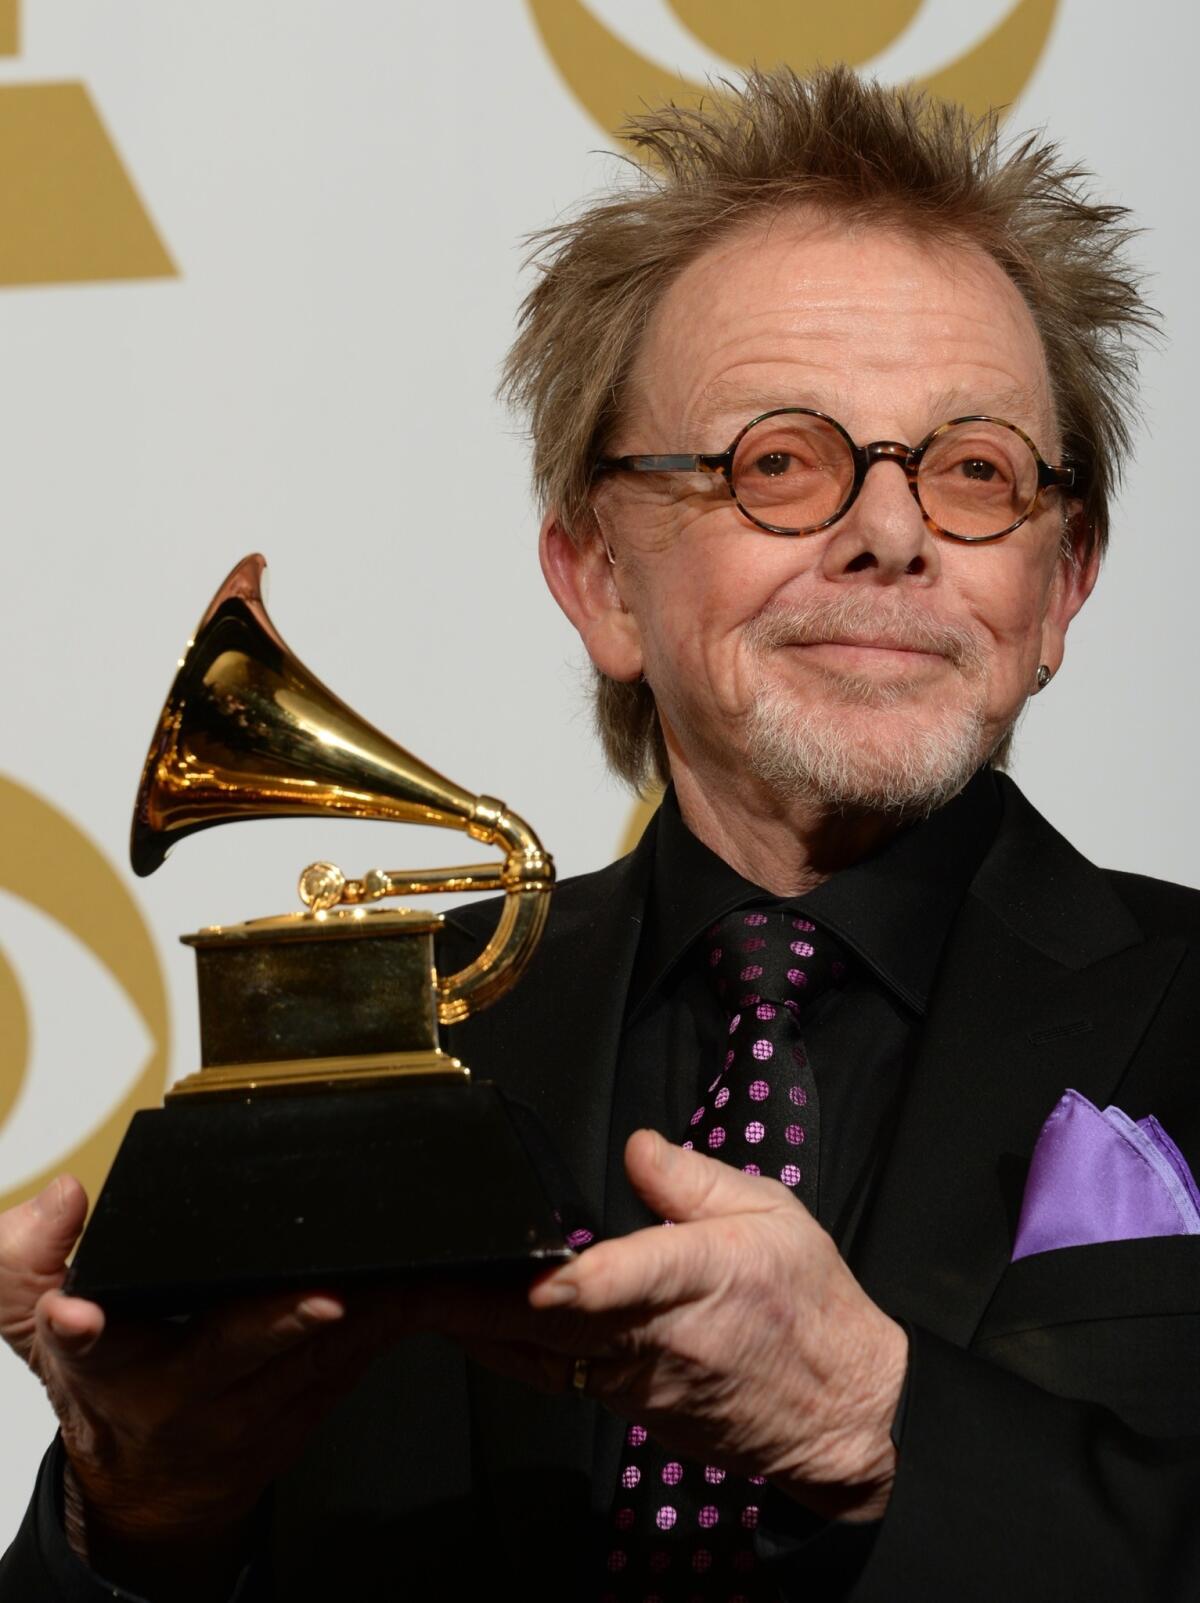 Paul Williams, who partnered with Daft Punk, poses in the press room with his Album of the Year award for "Random Access Memories" during the 56th Grammy Awards at the Staples Center on Jan. 26.